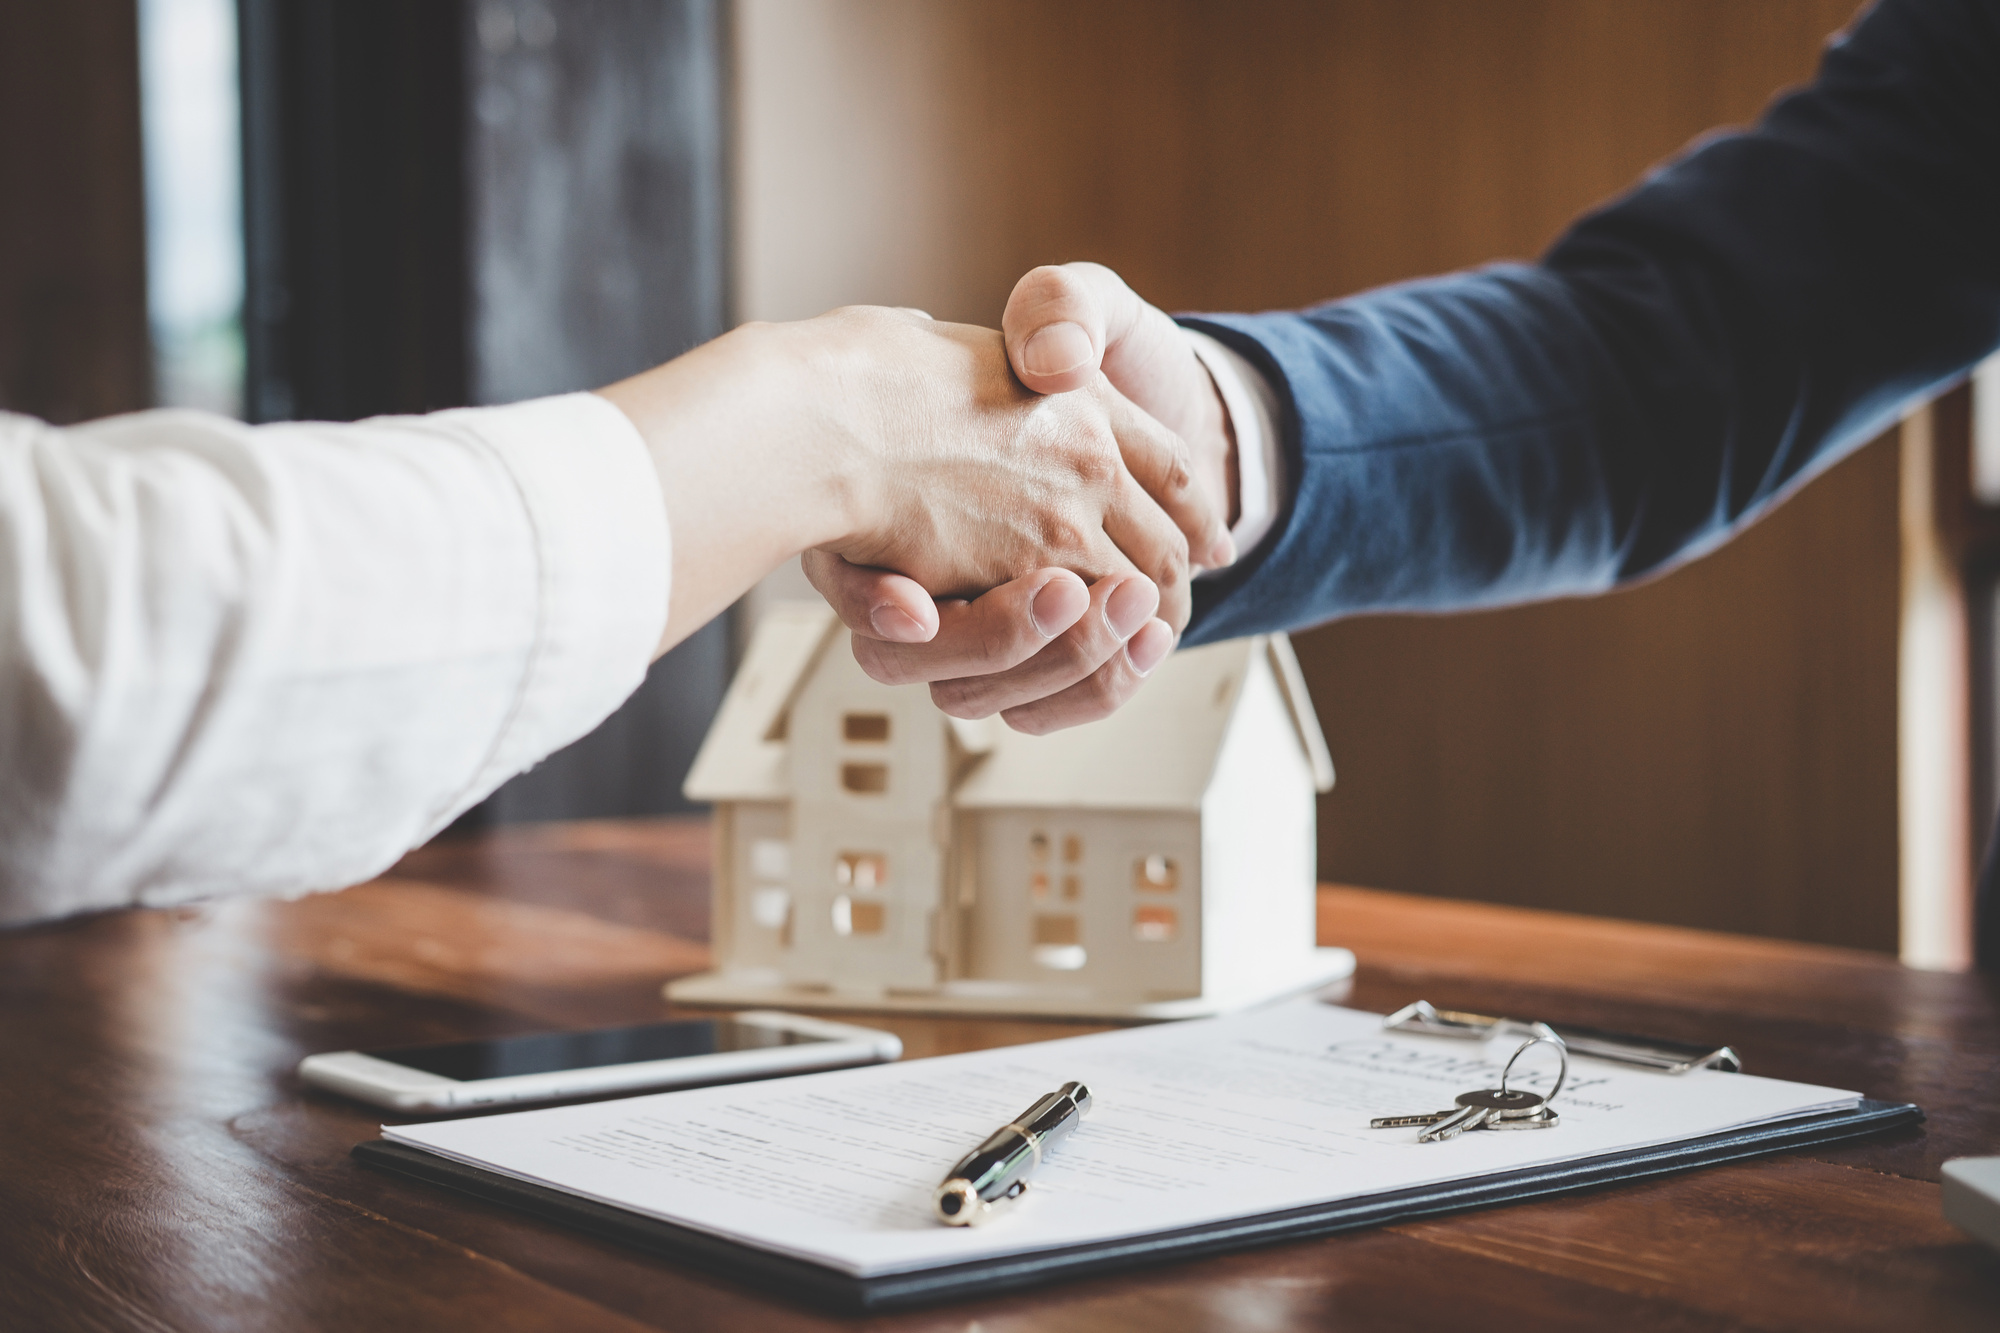 shaking hands after buying a home